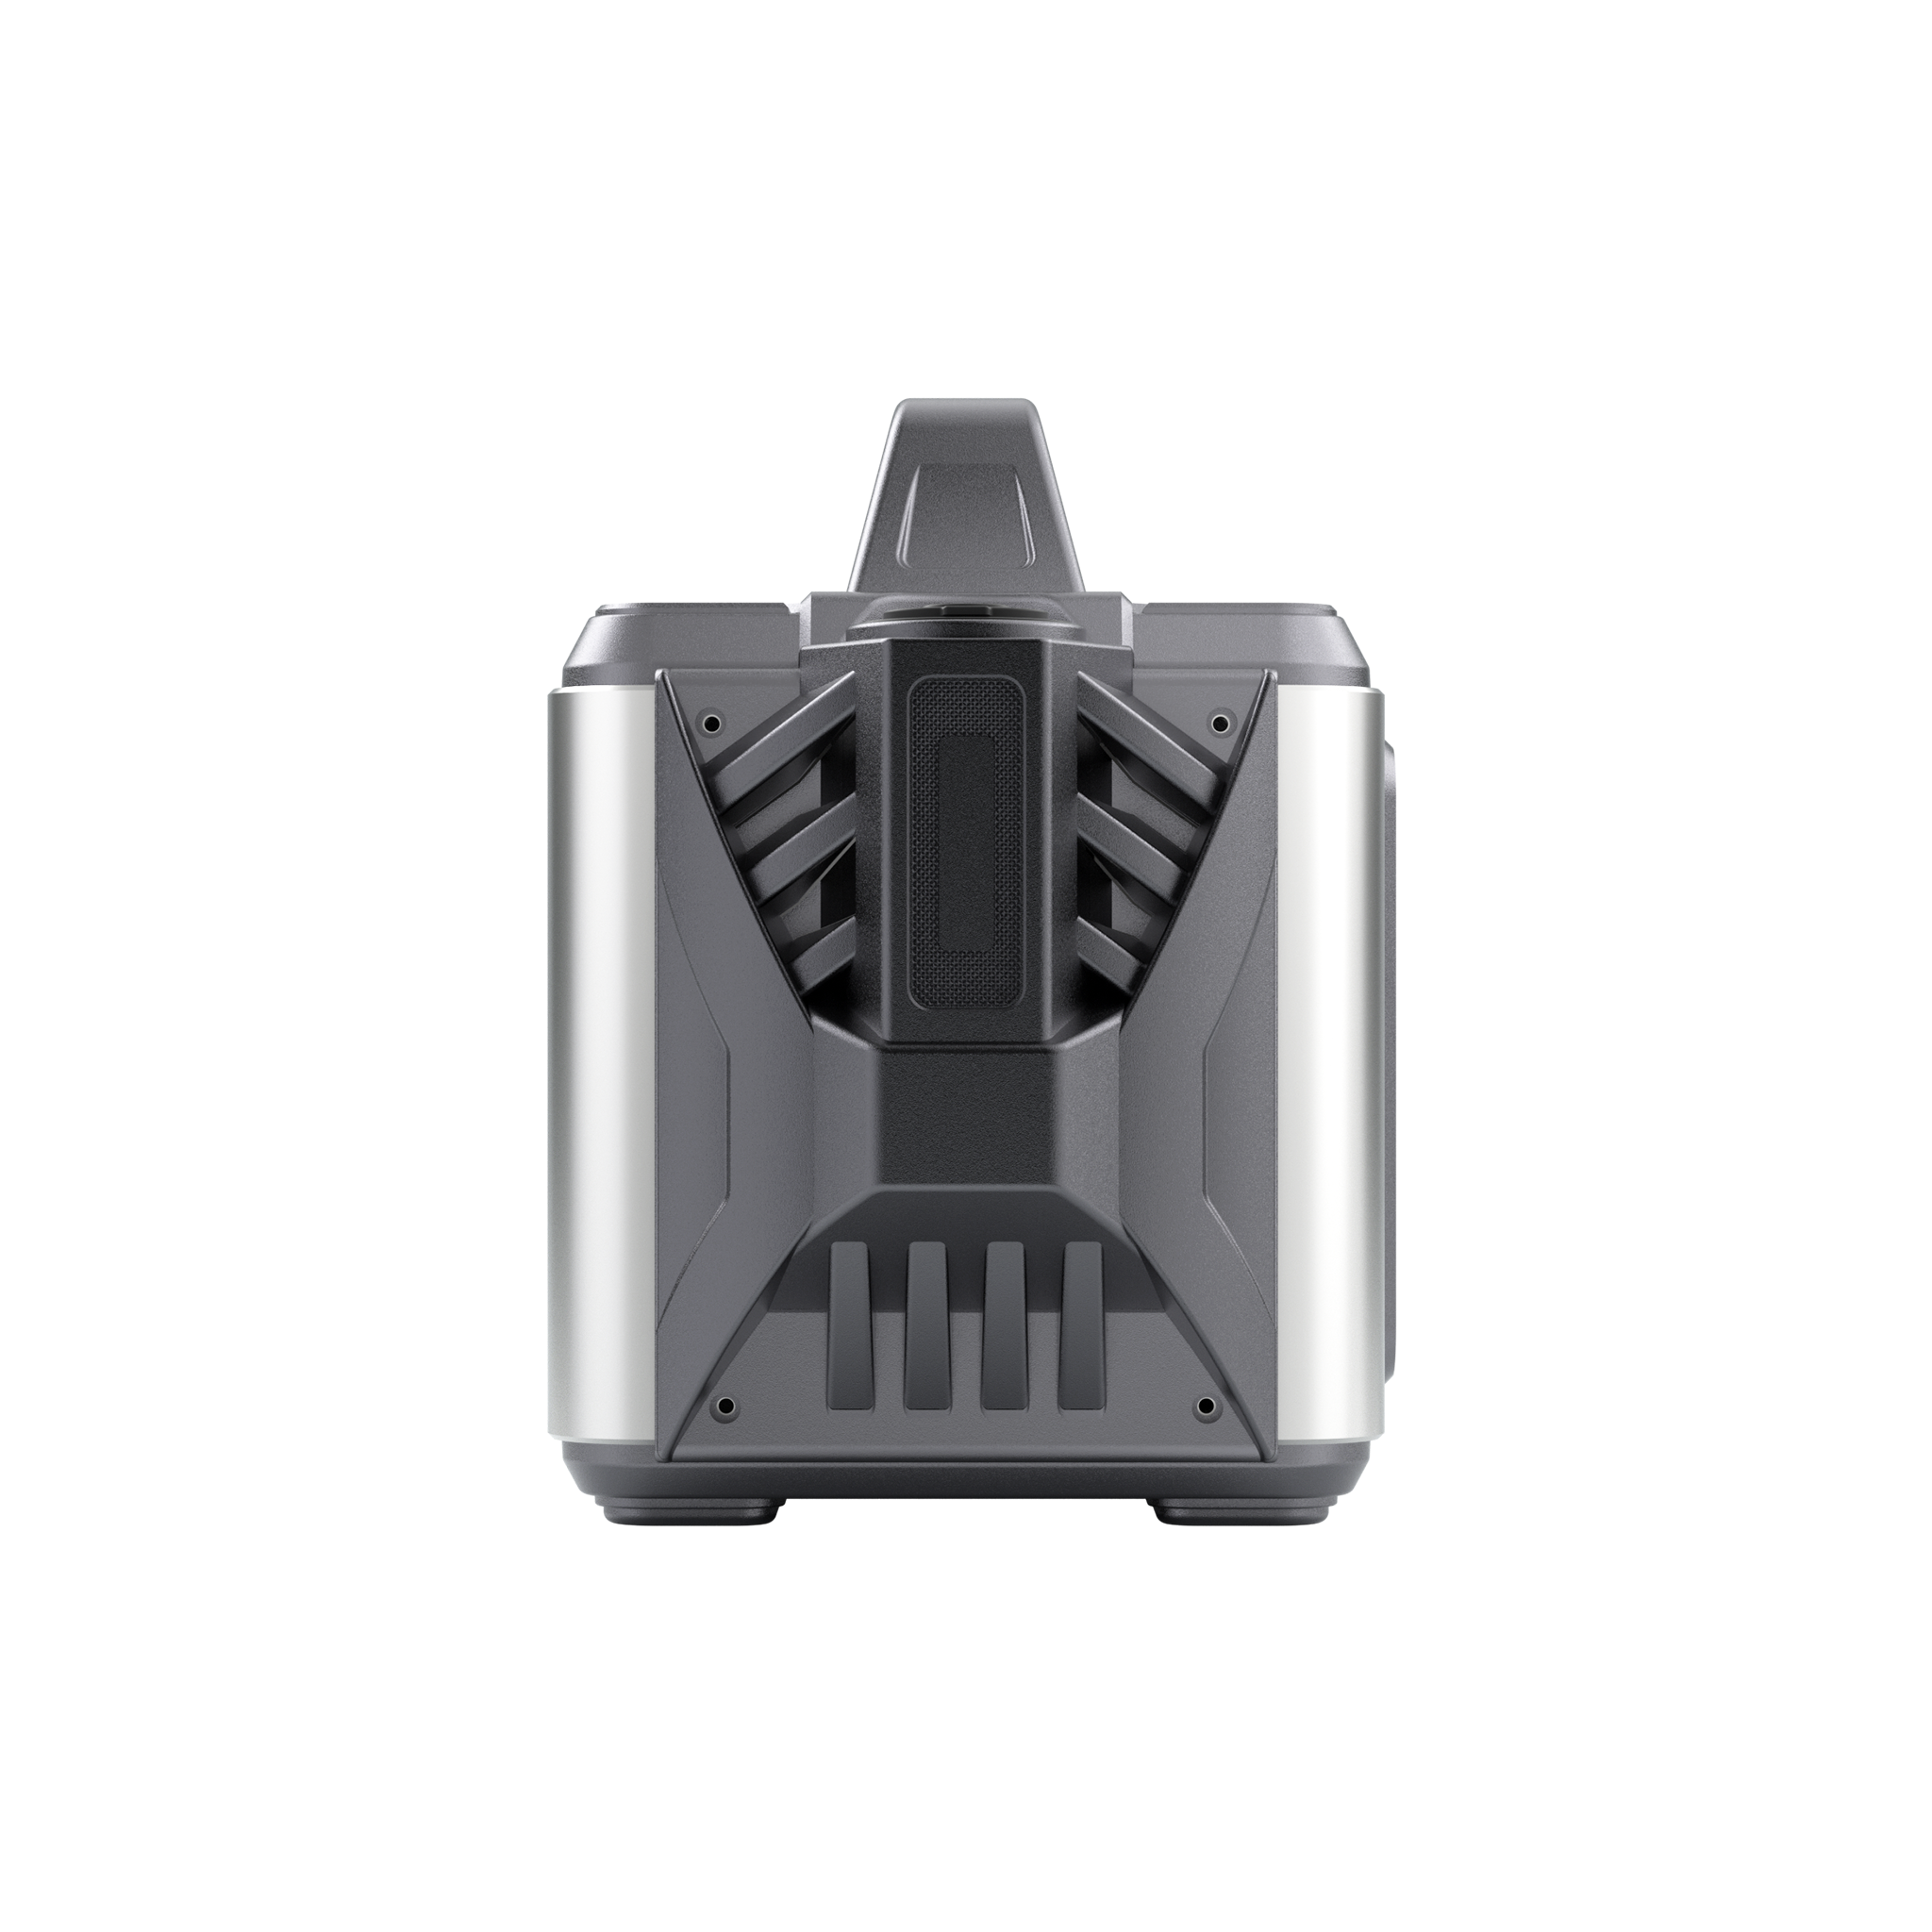 POWEREPUBLIC T306 portable power station, 300W 296Wh, metallic gray body with aircraft wing design, a car charger, and a handle.